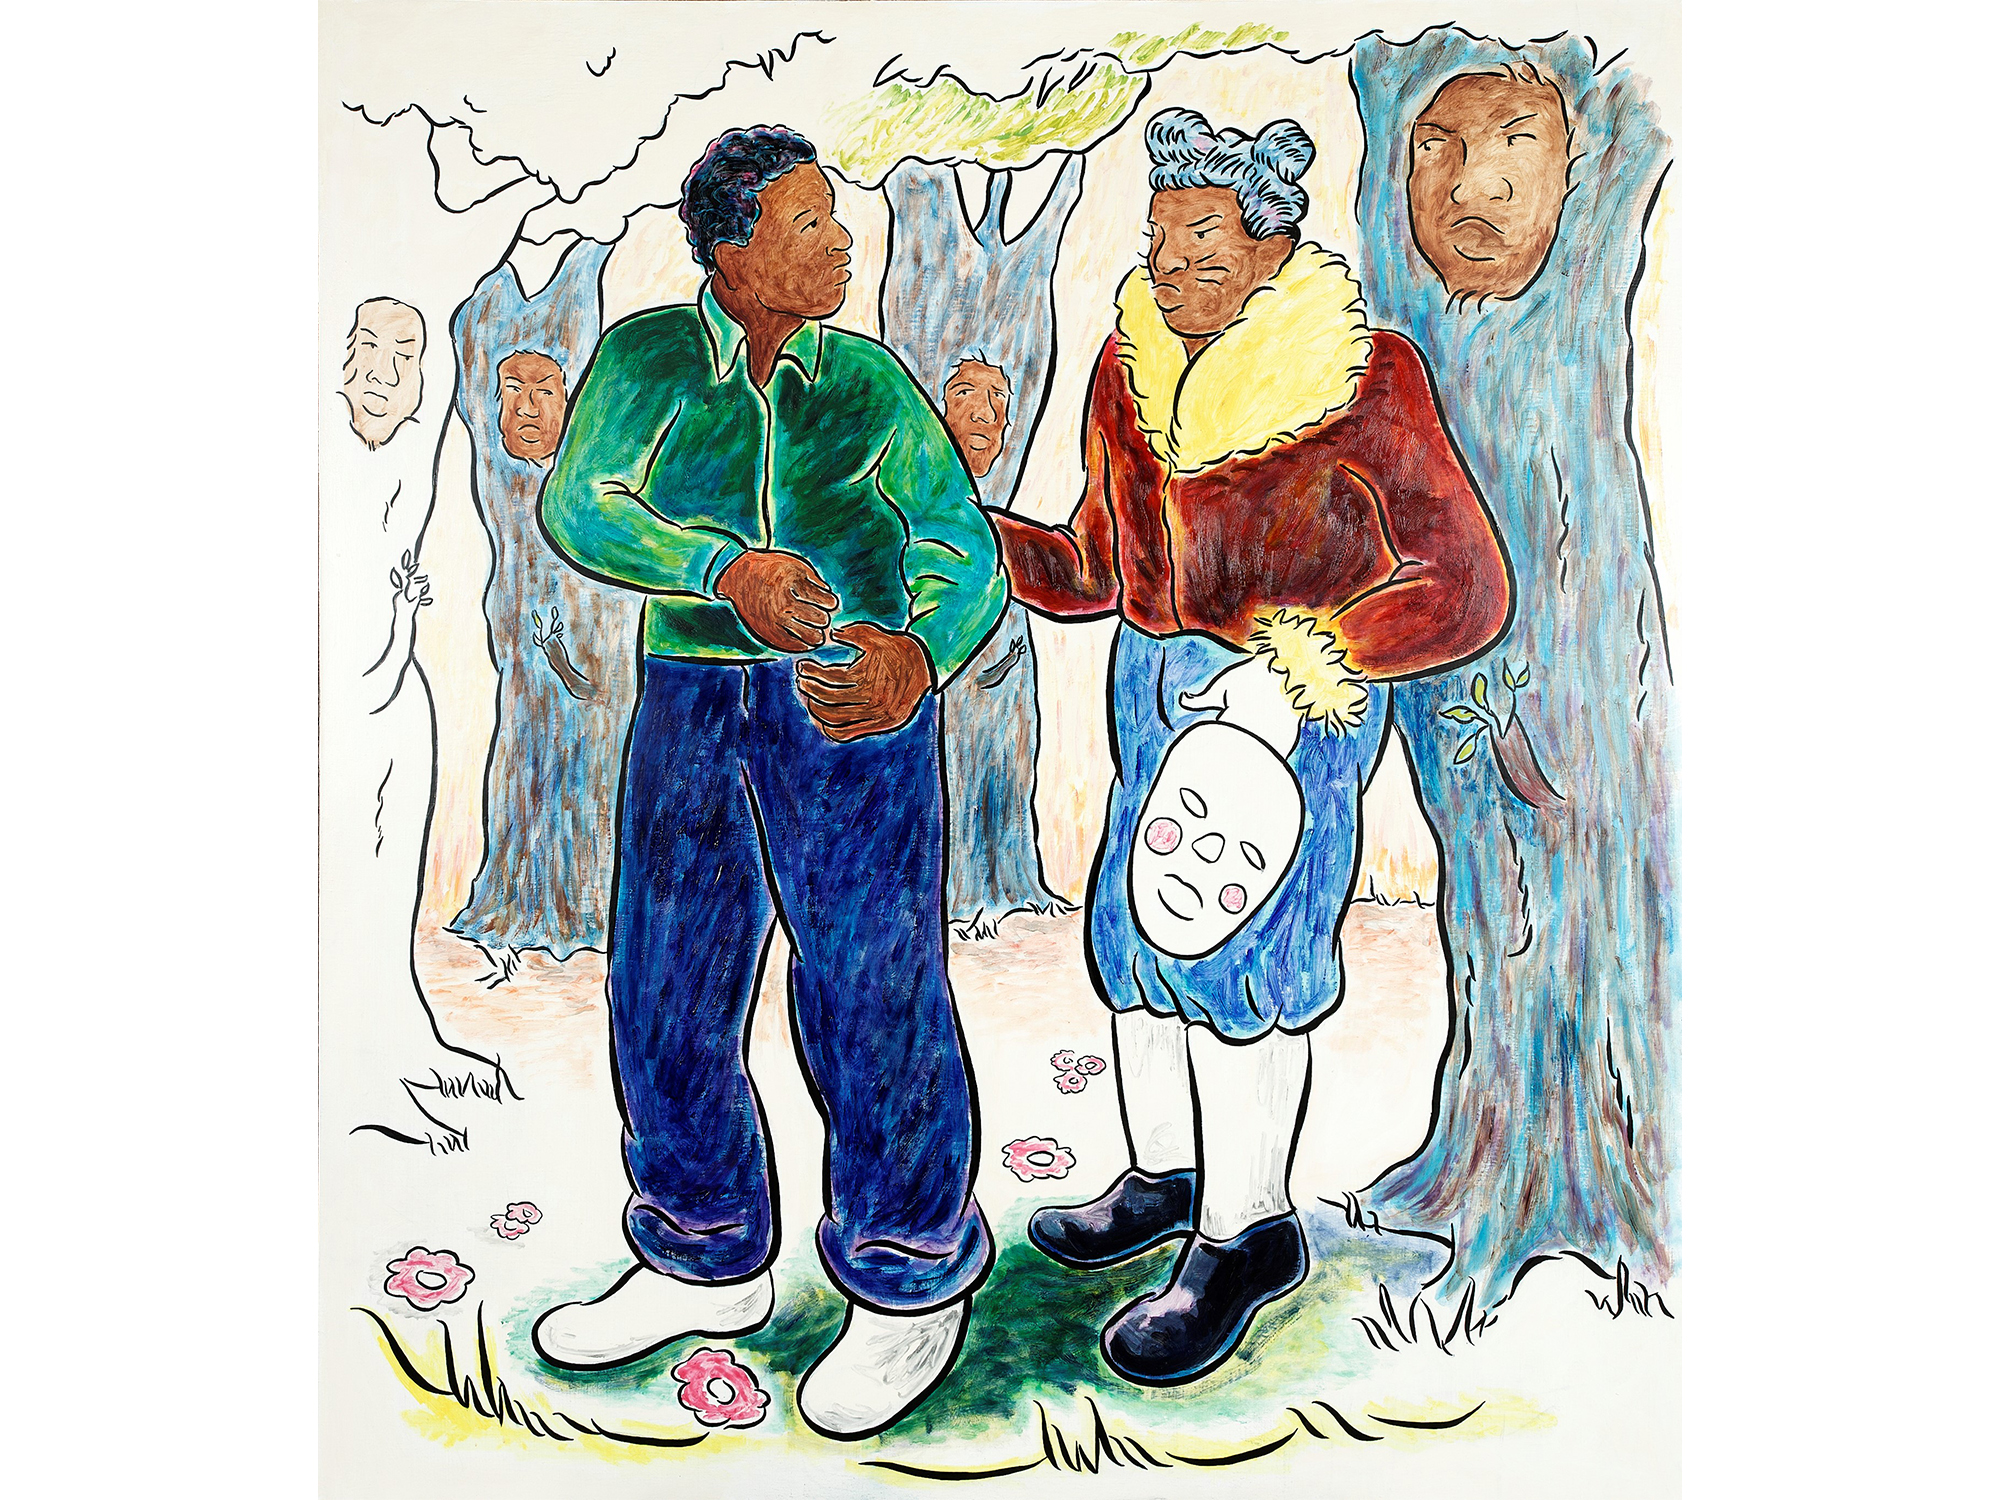 Line drawing with color of two dark skinned figures, one man in short and pants and a second on the right with whiskers and mask in his hand. Both figures surrounded by trees with the face of the man on them.